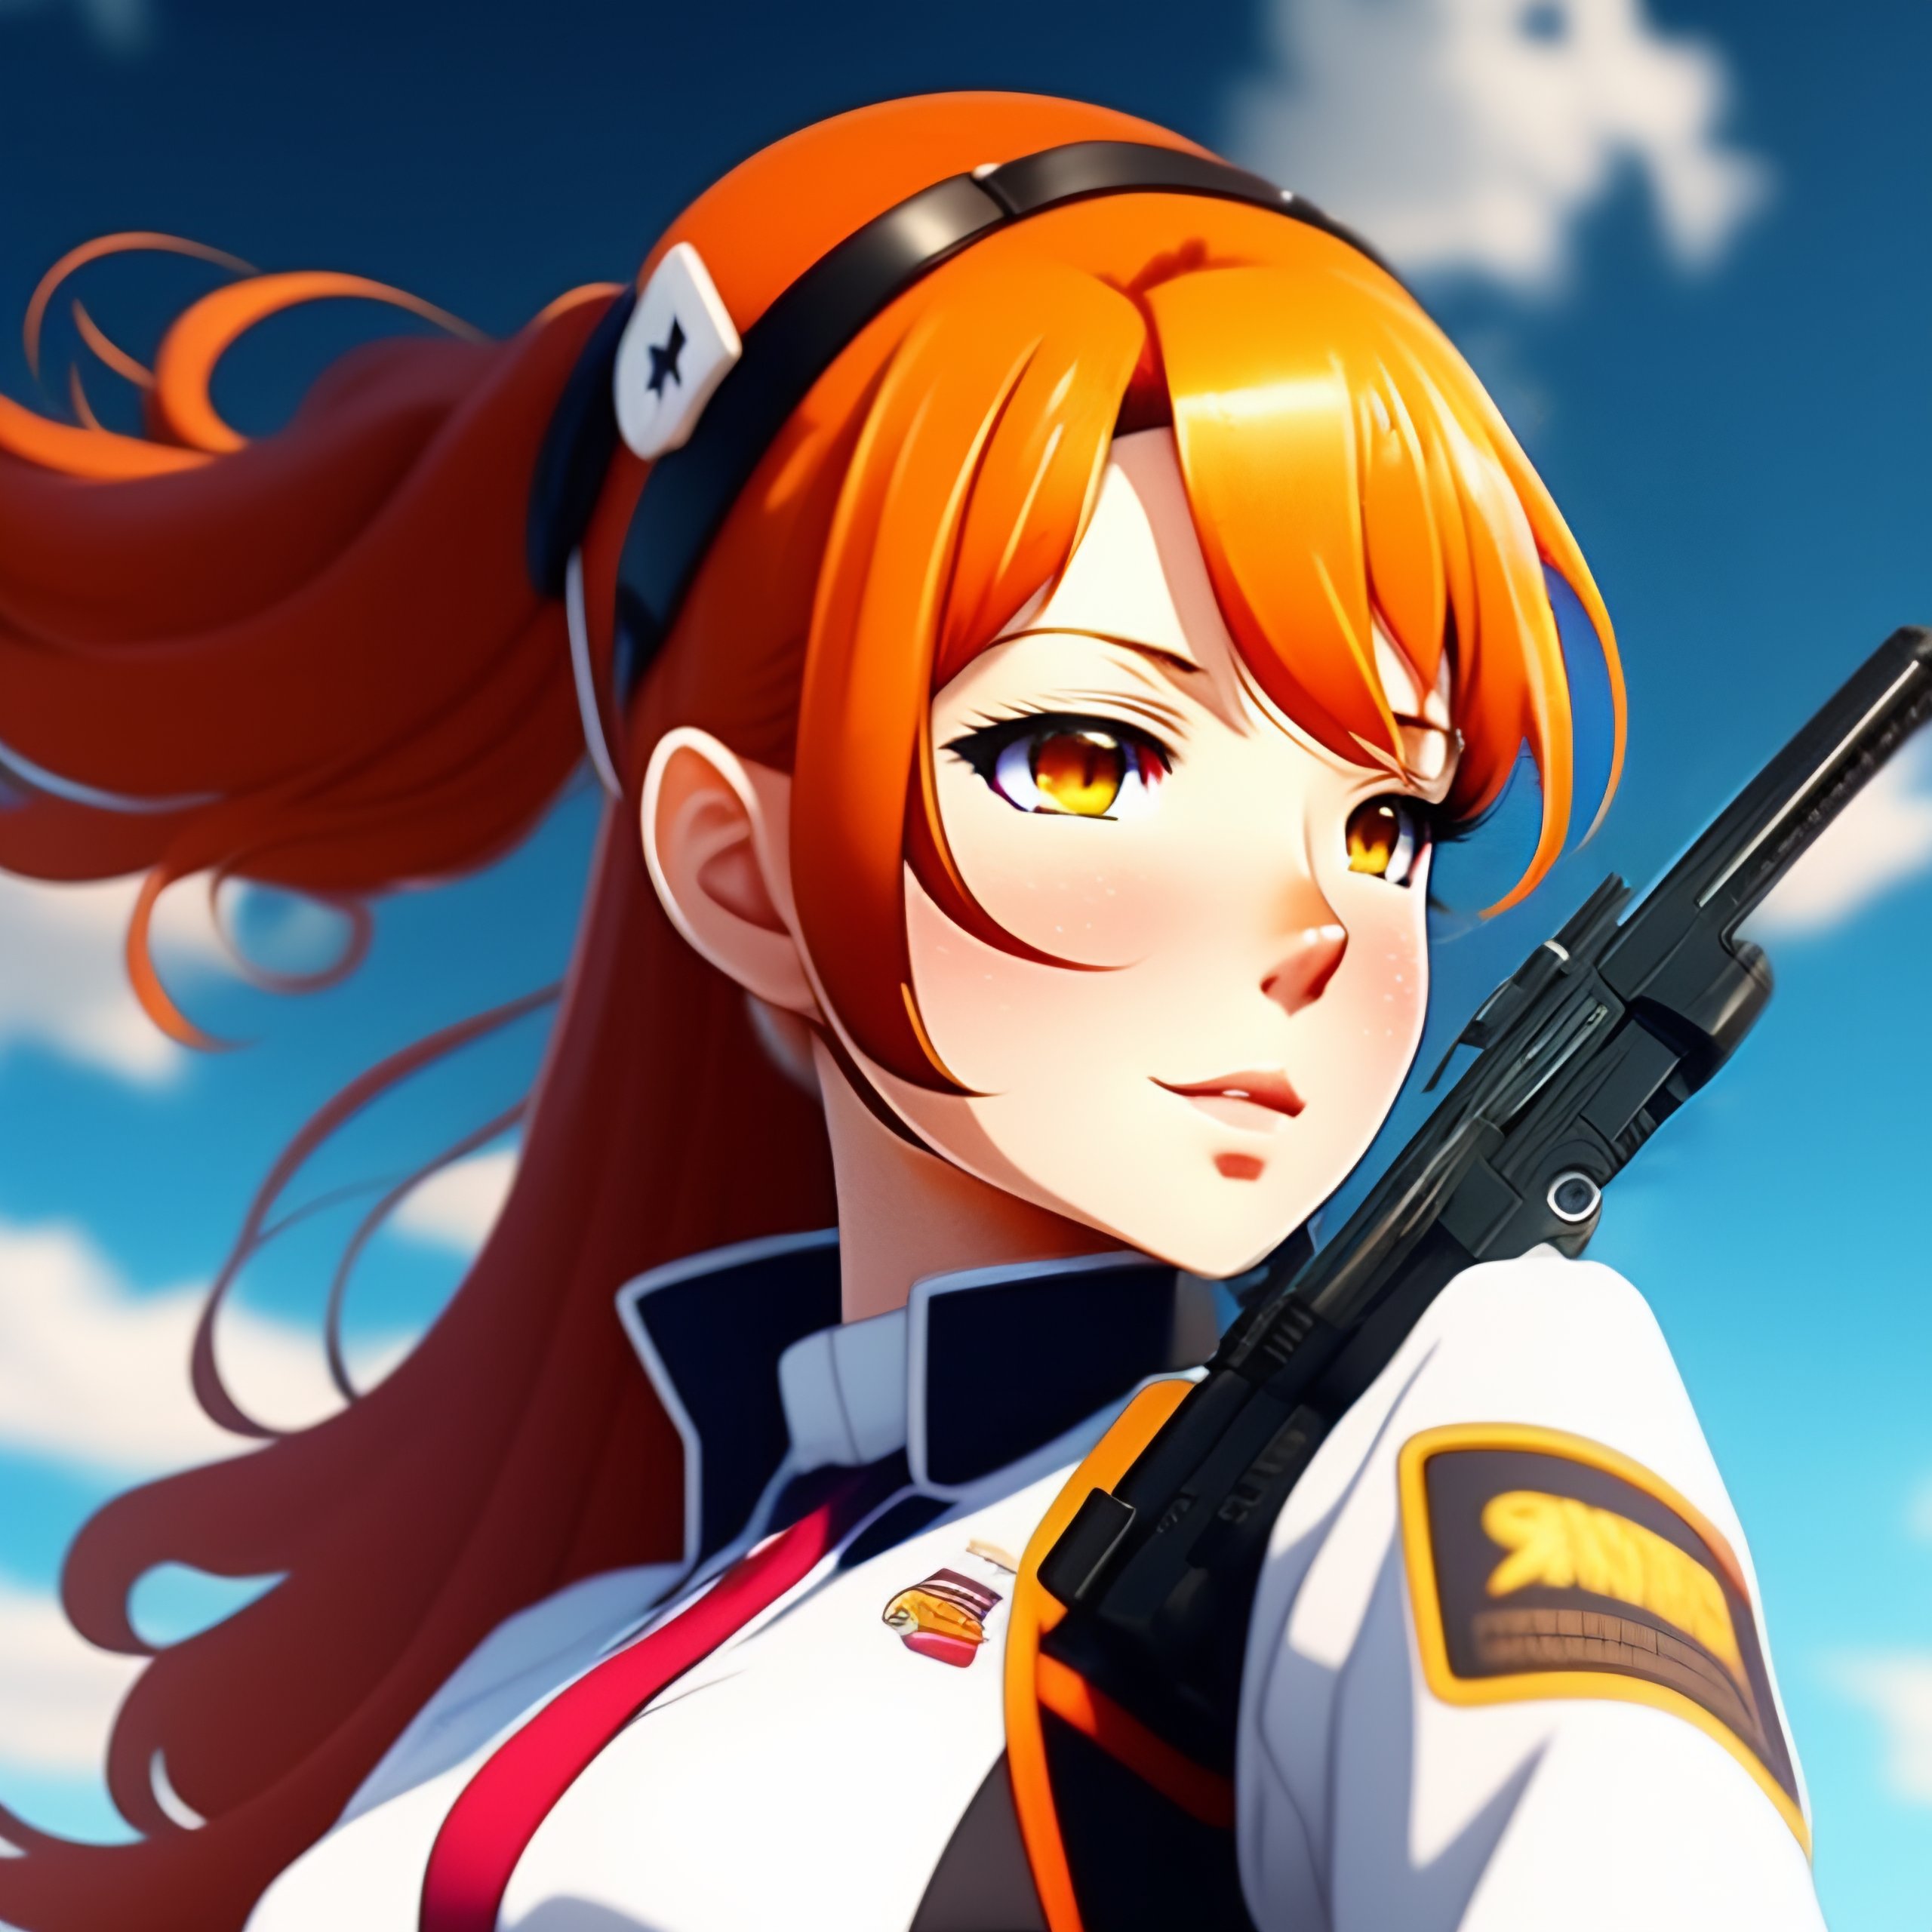 Lexica - Anime style girl with ginger hair in a high ponytail and in a ...